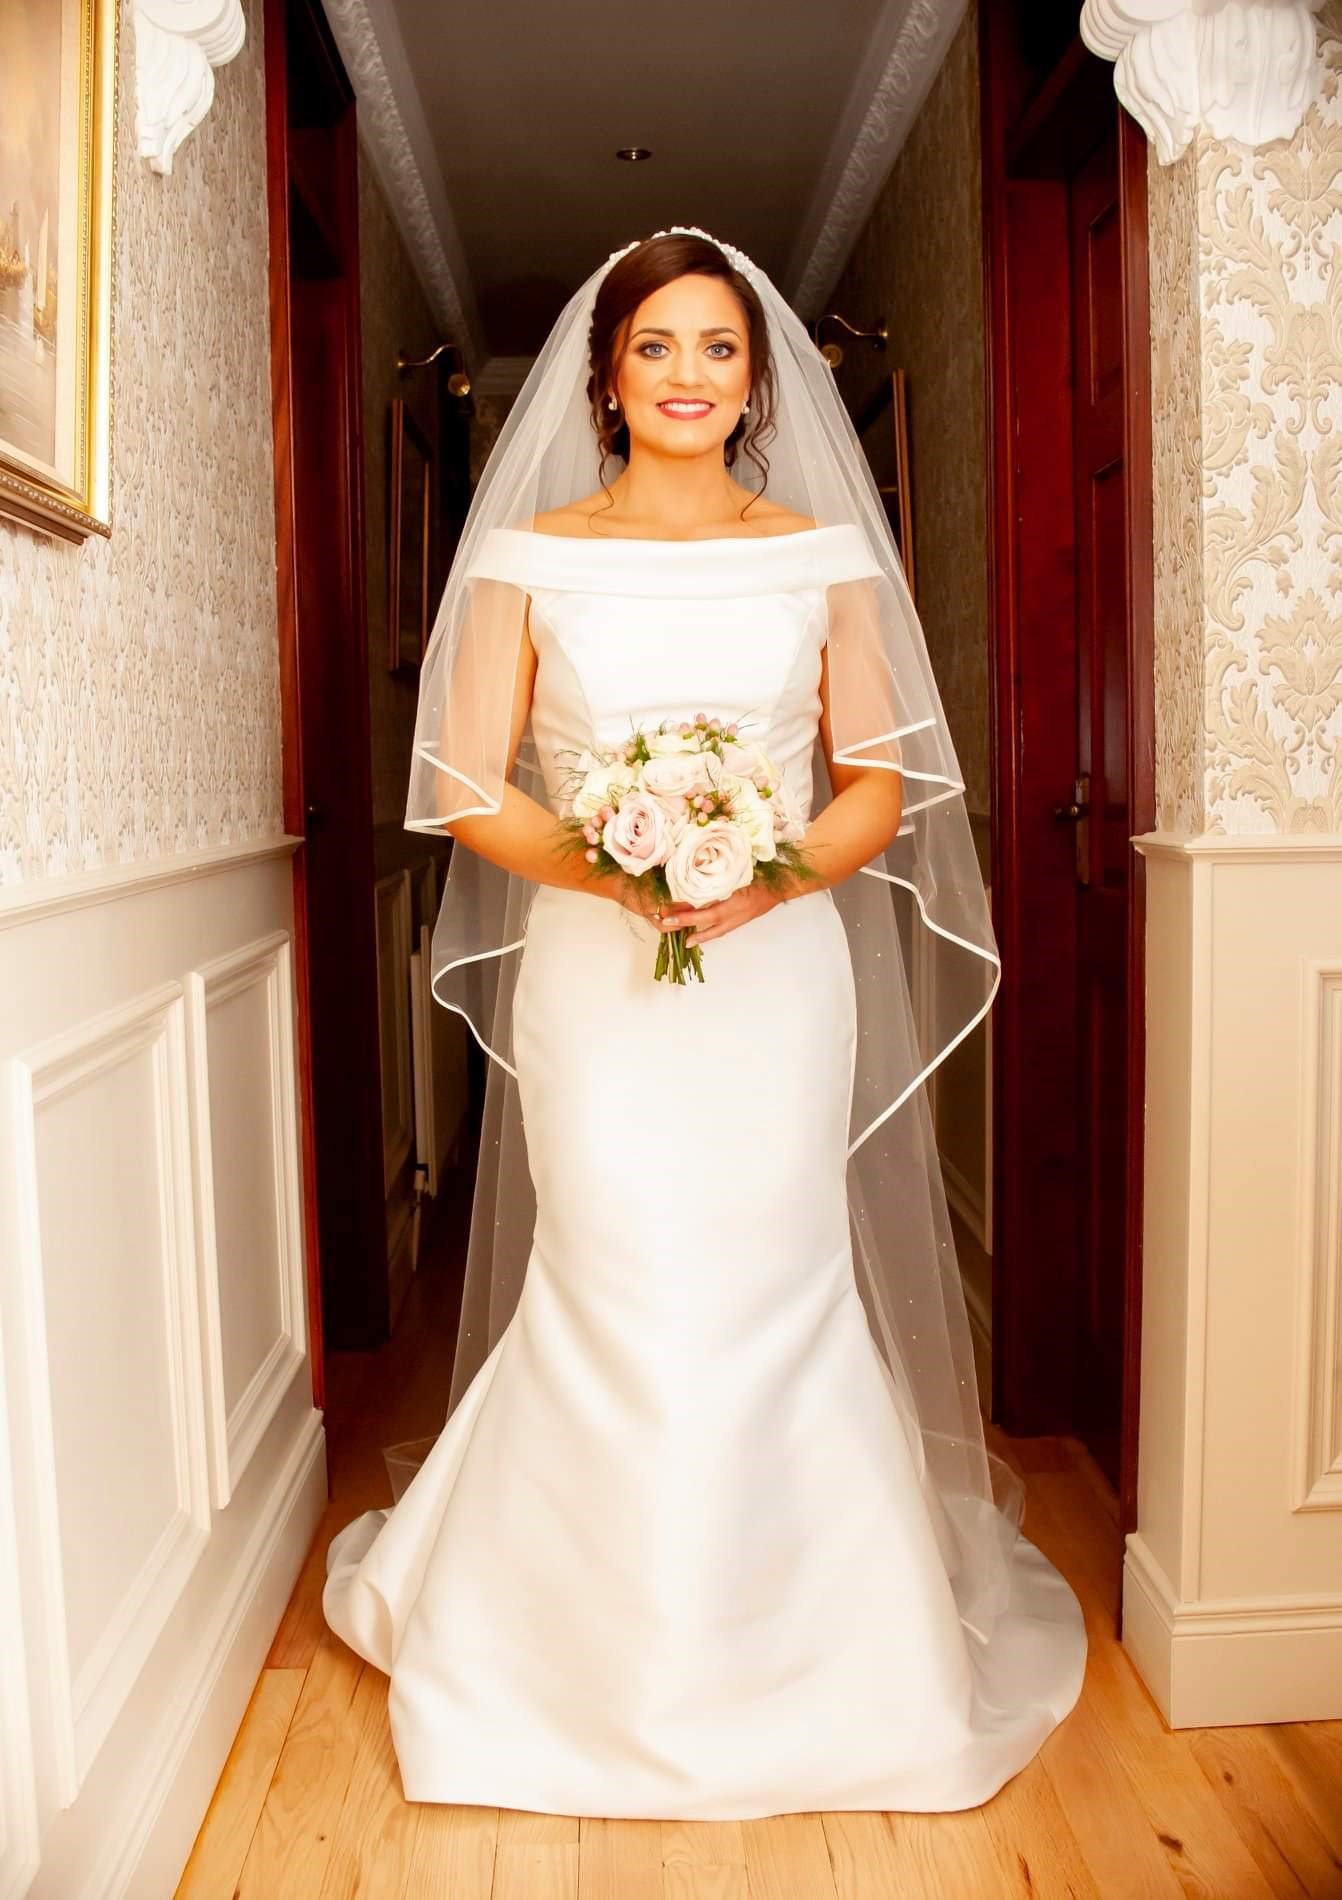 Real bride Sinead stood in a hallway in Ronald Joyce 69153, a plain ivory Mikado fit and flare wedding dress with an off the shoulder bateau neckline and ivory beaded waistband